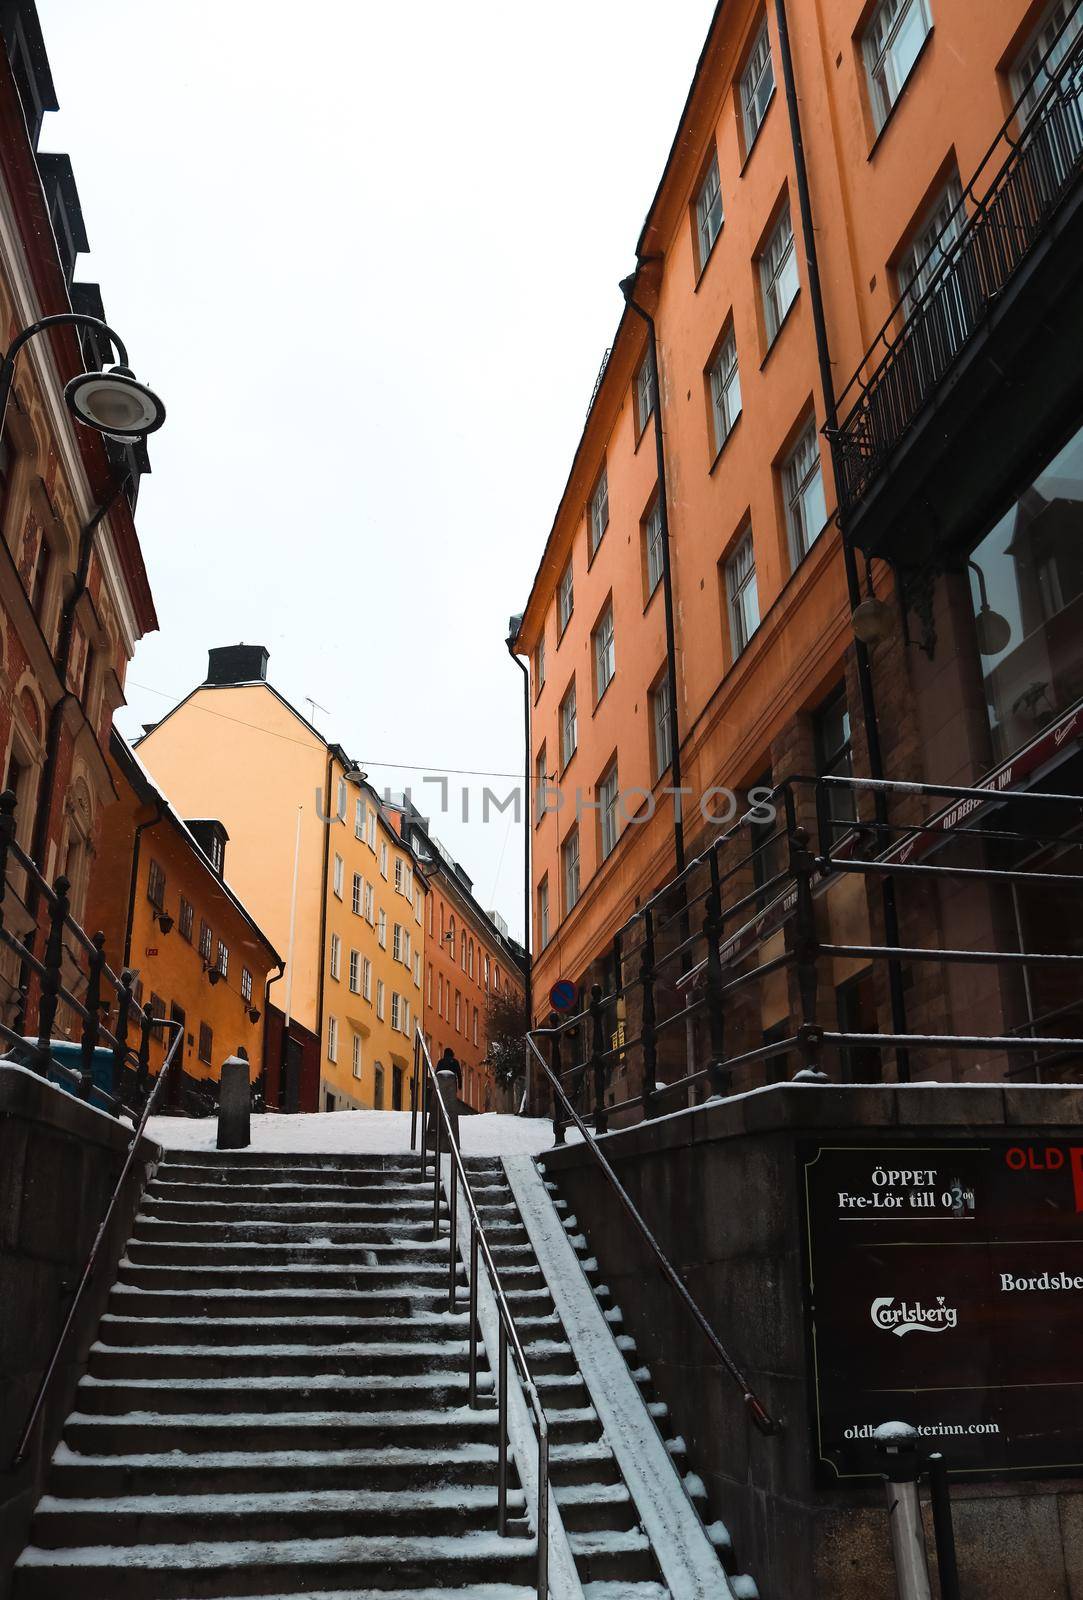 High quality shot of a snowy, colourful, traditional Sodermalm street, south Stockholm, Sweden.